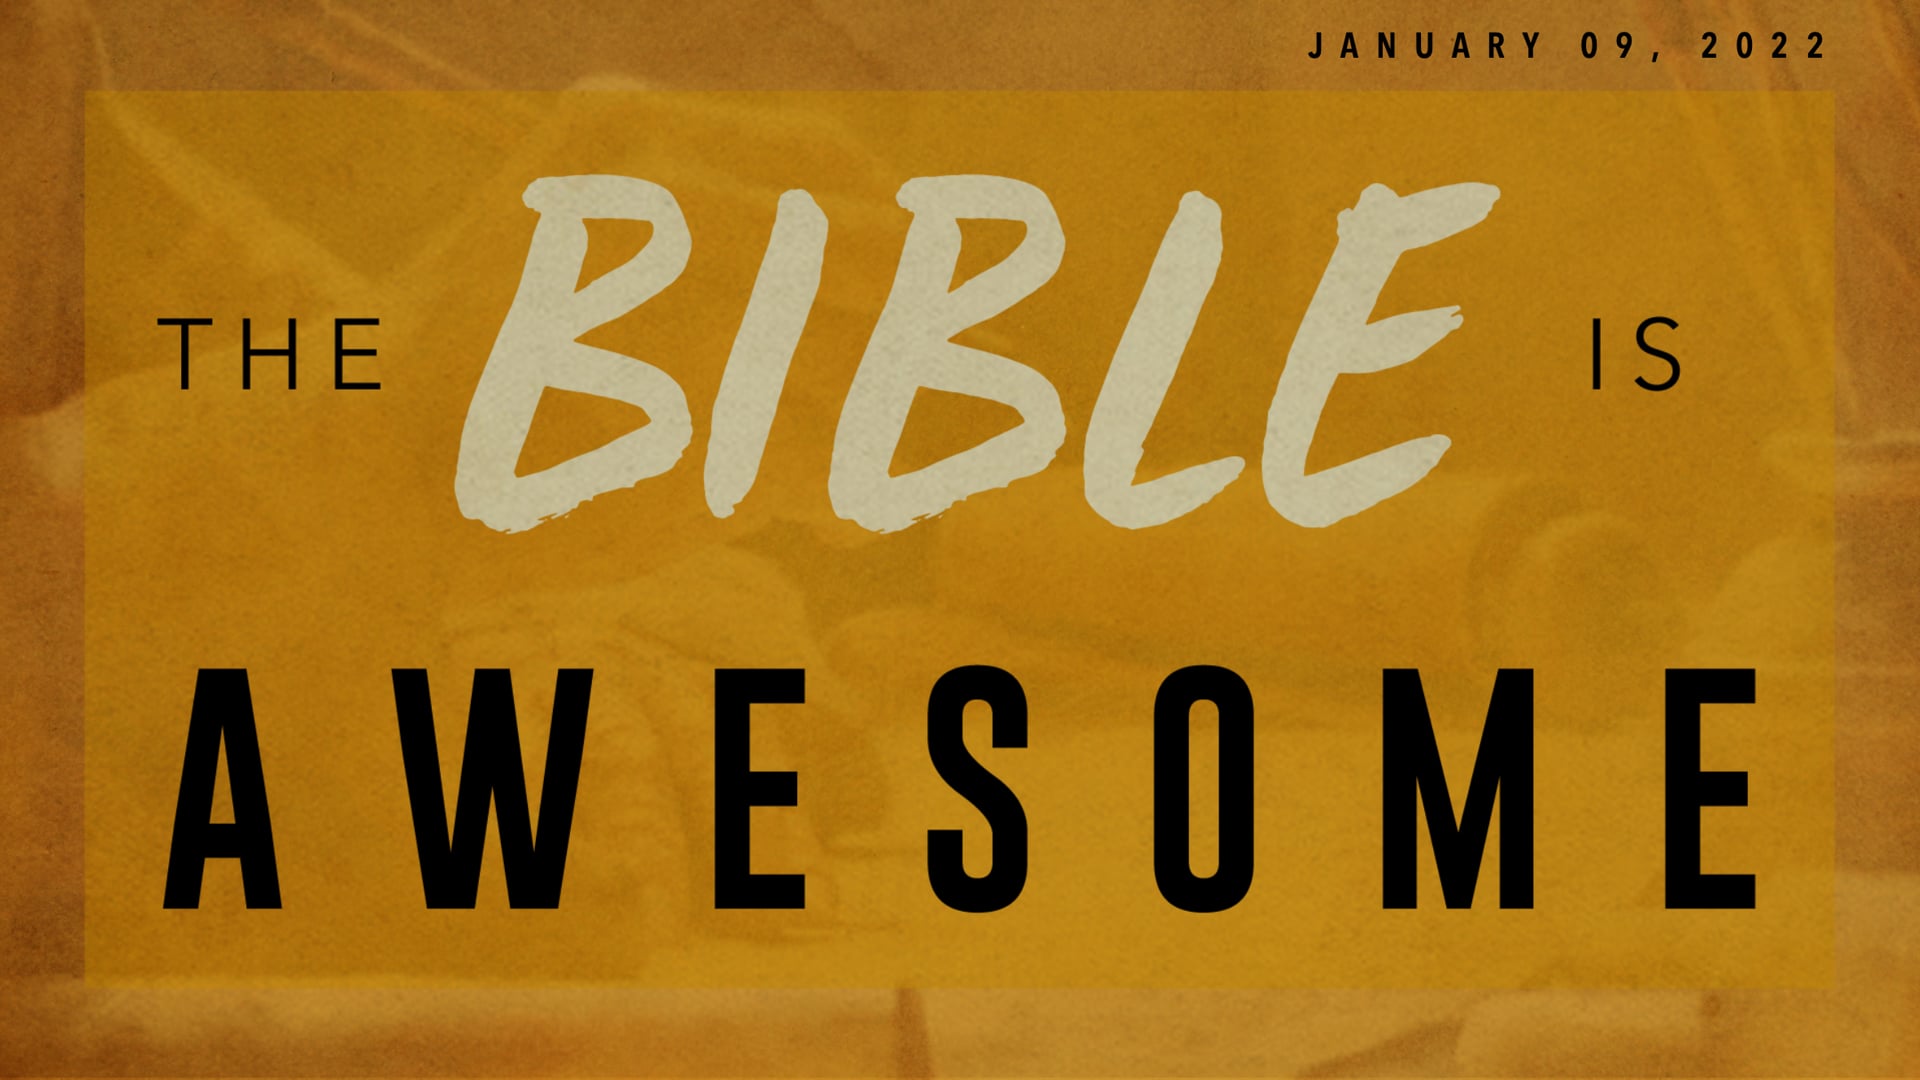 The Bible is Awesome...and we should read it and obey it.